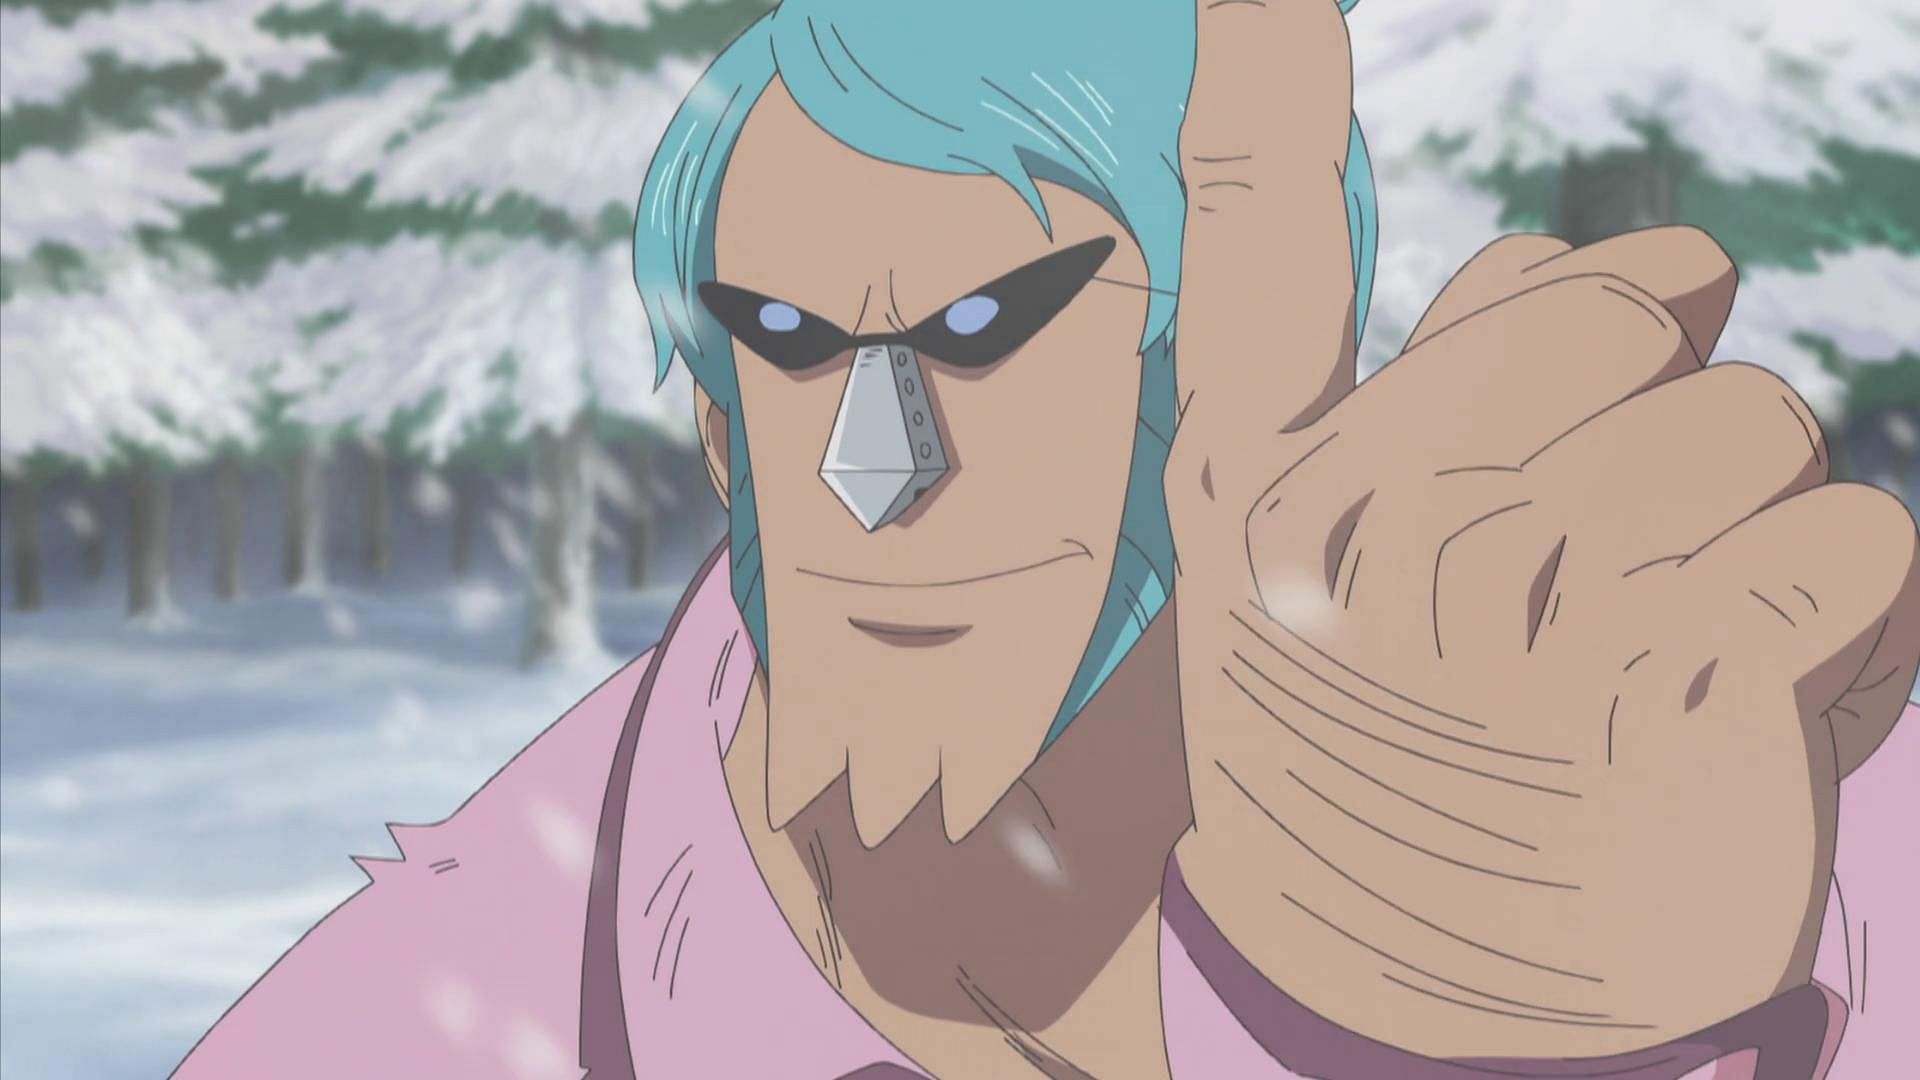 Admittedly, Franky is hilarious (Image via Toei Animation)